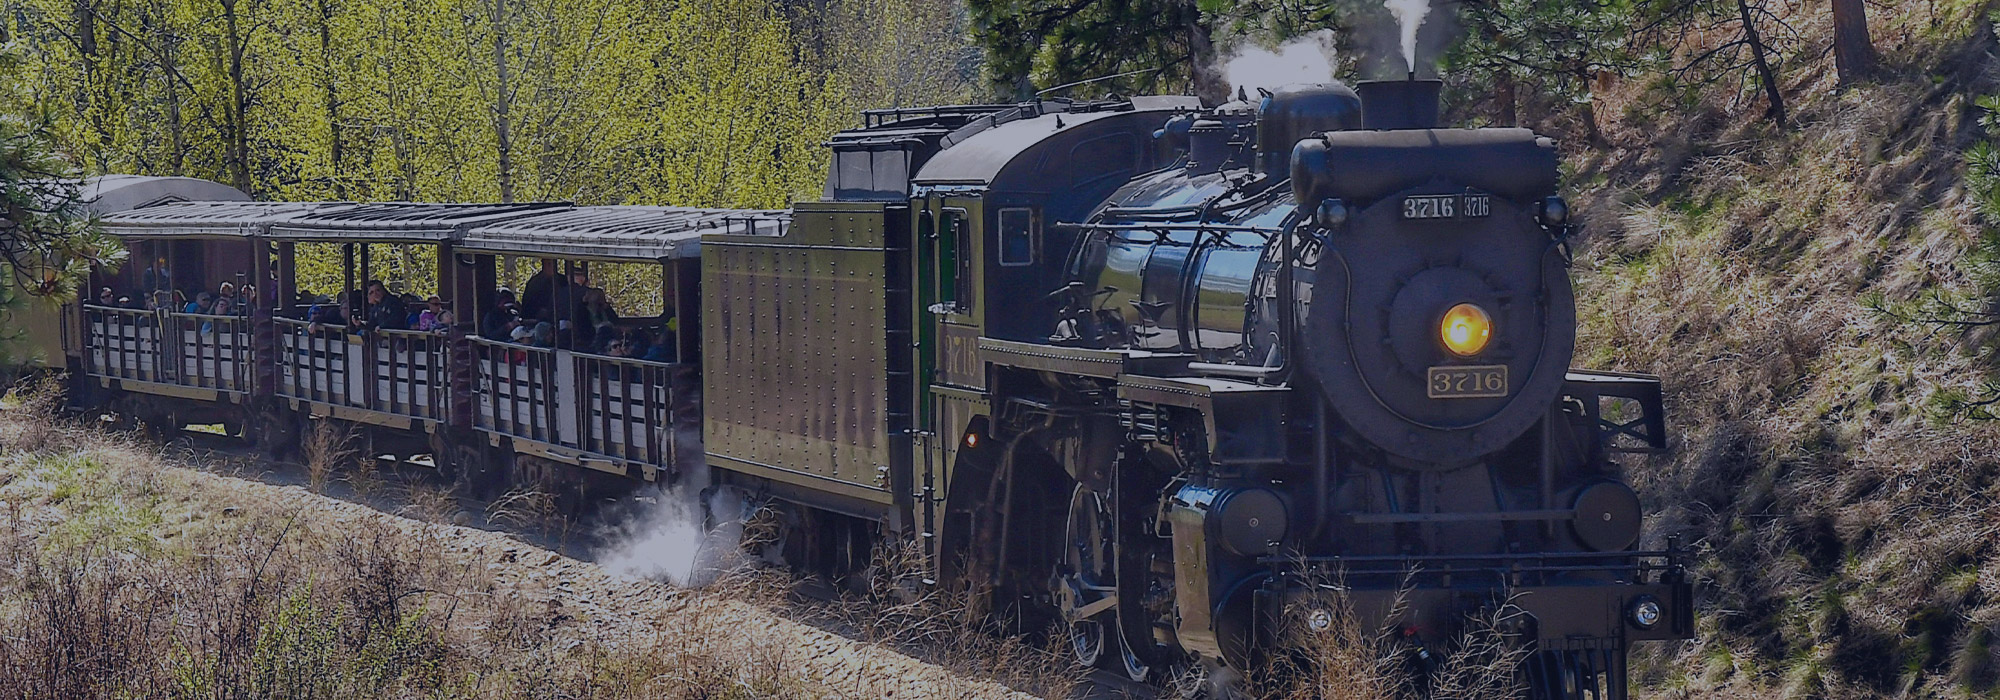 Kettle Valley Steam Railway | Ride the historic Kettle Valley Railway in BC